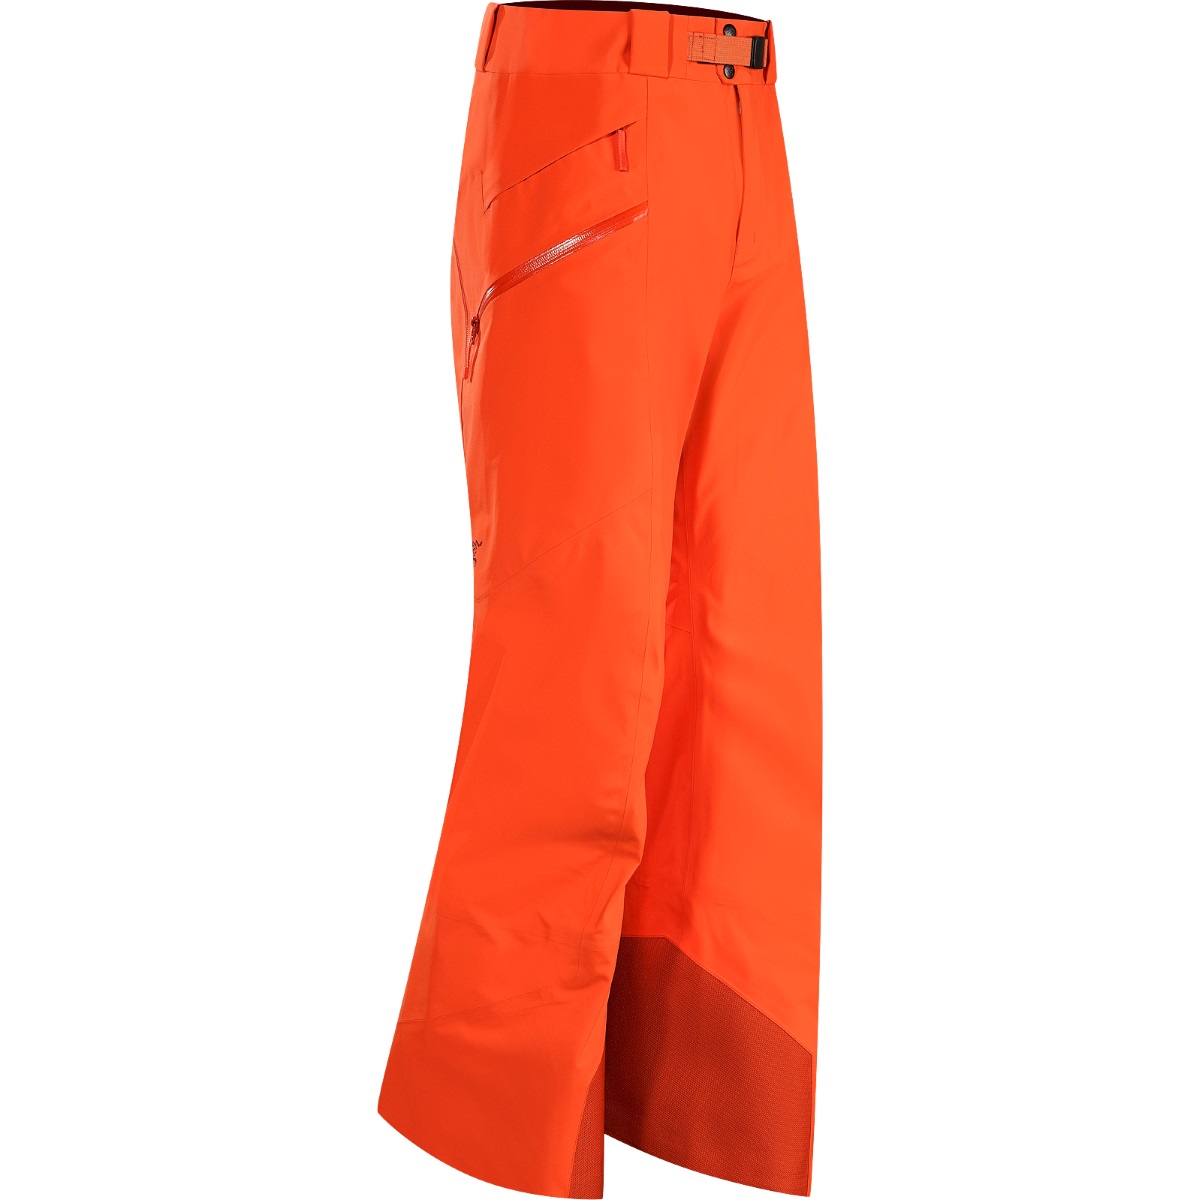 Arc'teryx Sabre Pant, men's, discontinued colors (free ground shipping ...